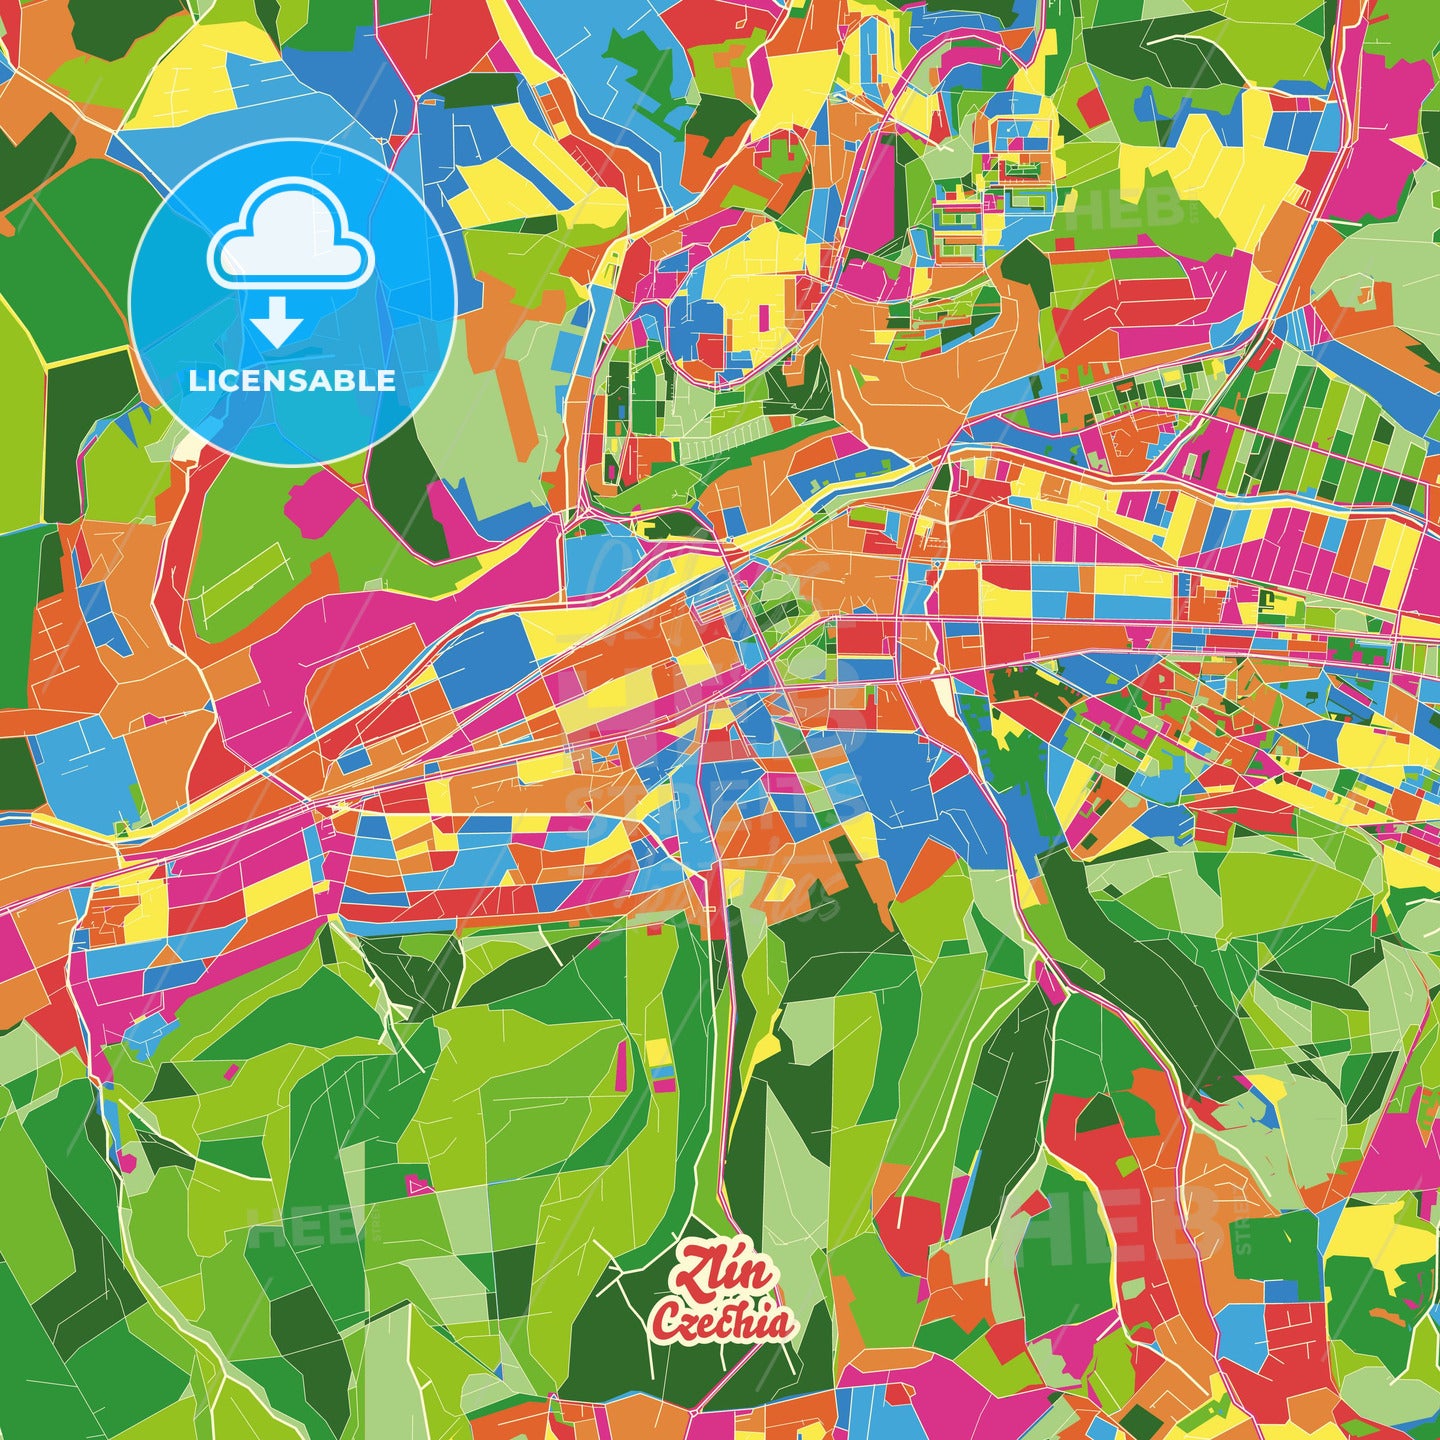 Zlín, Czechia Crazy Colorful Street Map Poster Template - HEBSTREITS Sketches